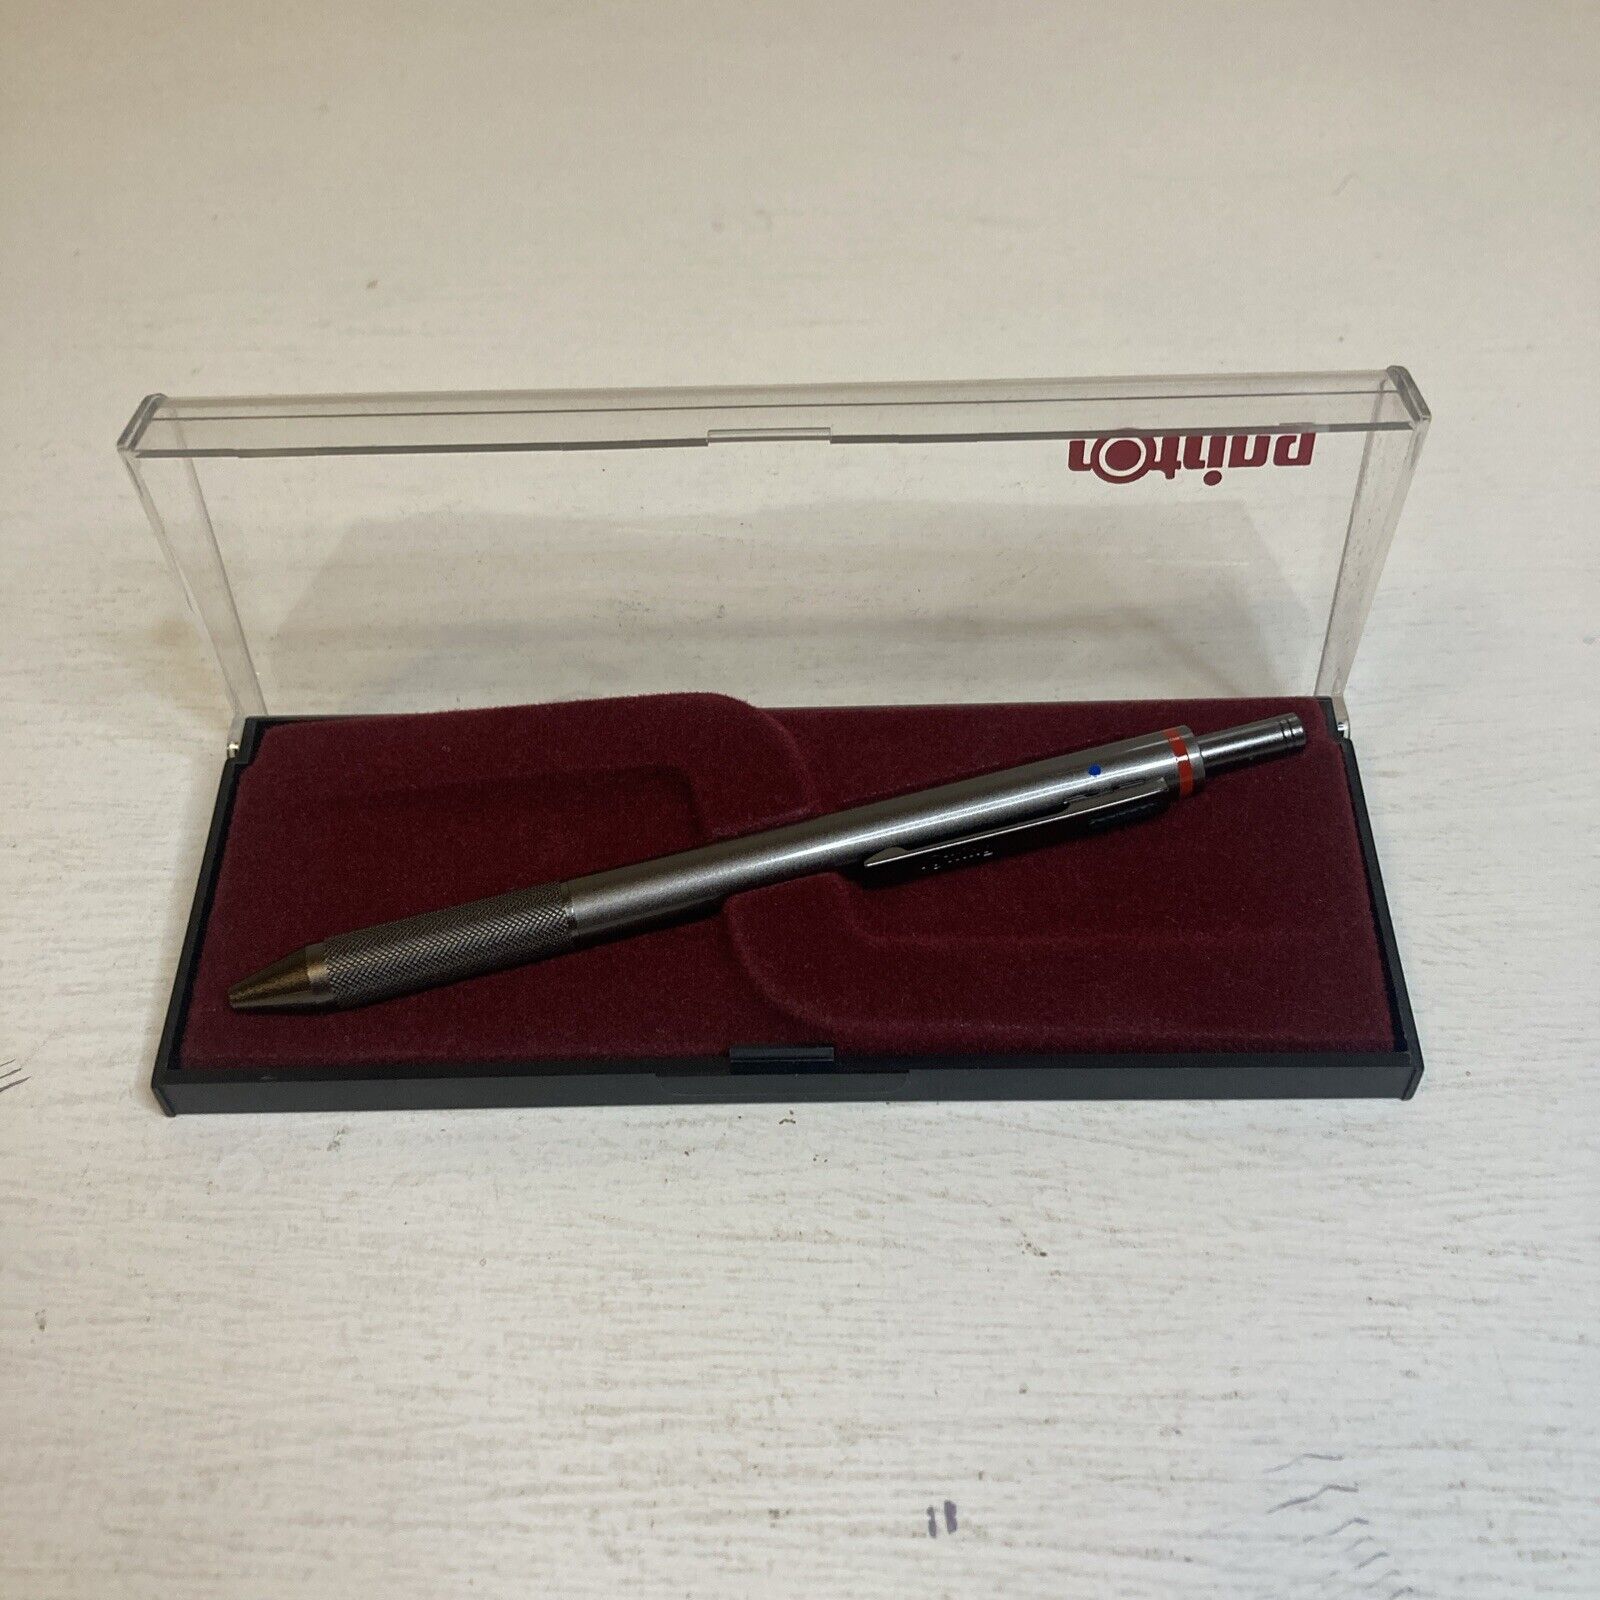 Vintage Rotring Quattro Pen Gun-Metal Grey with Box and Papers. See Pictures